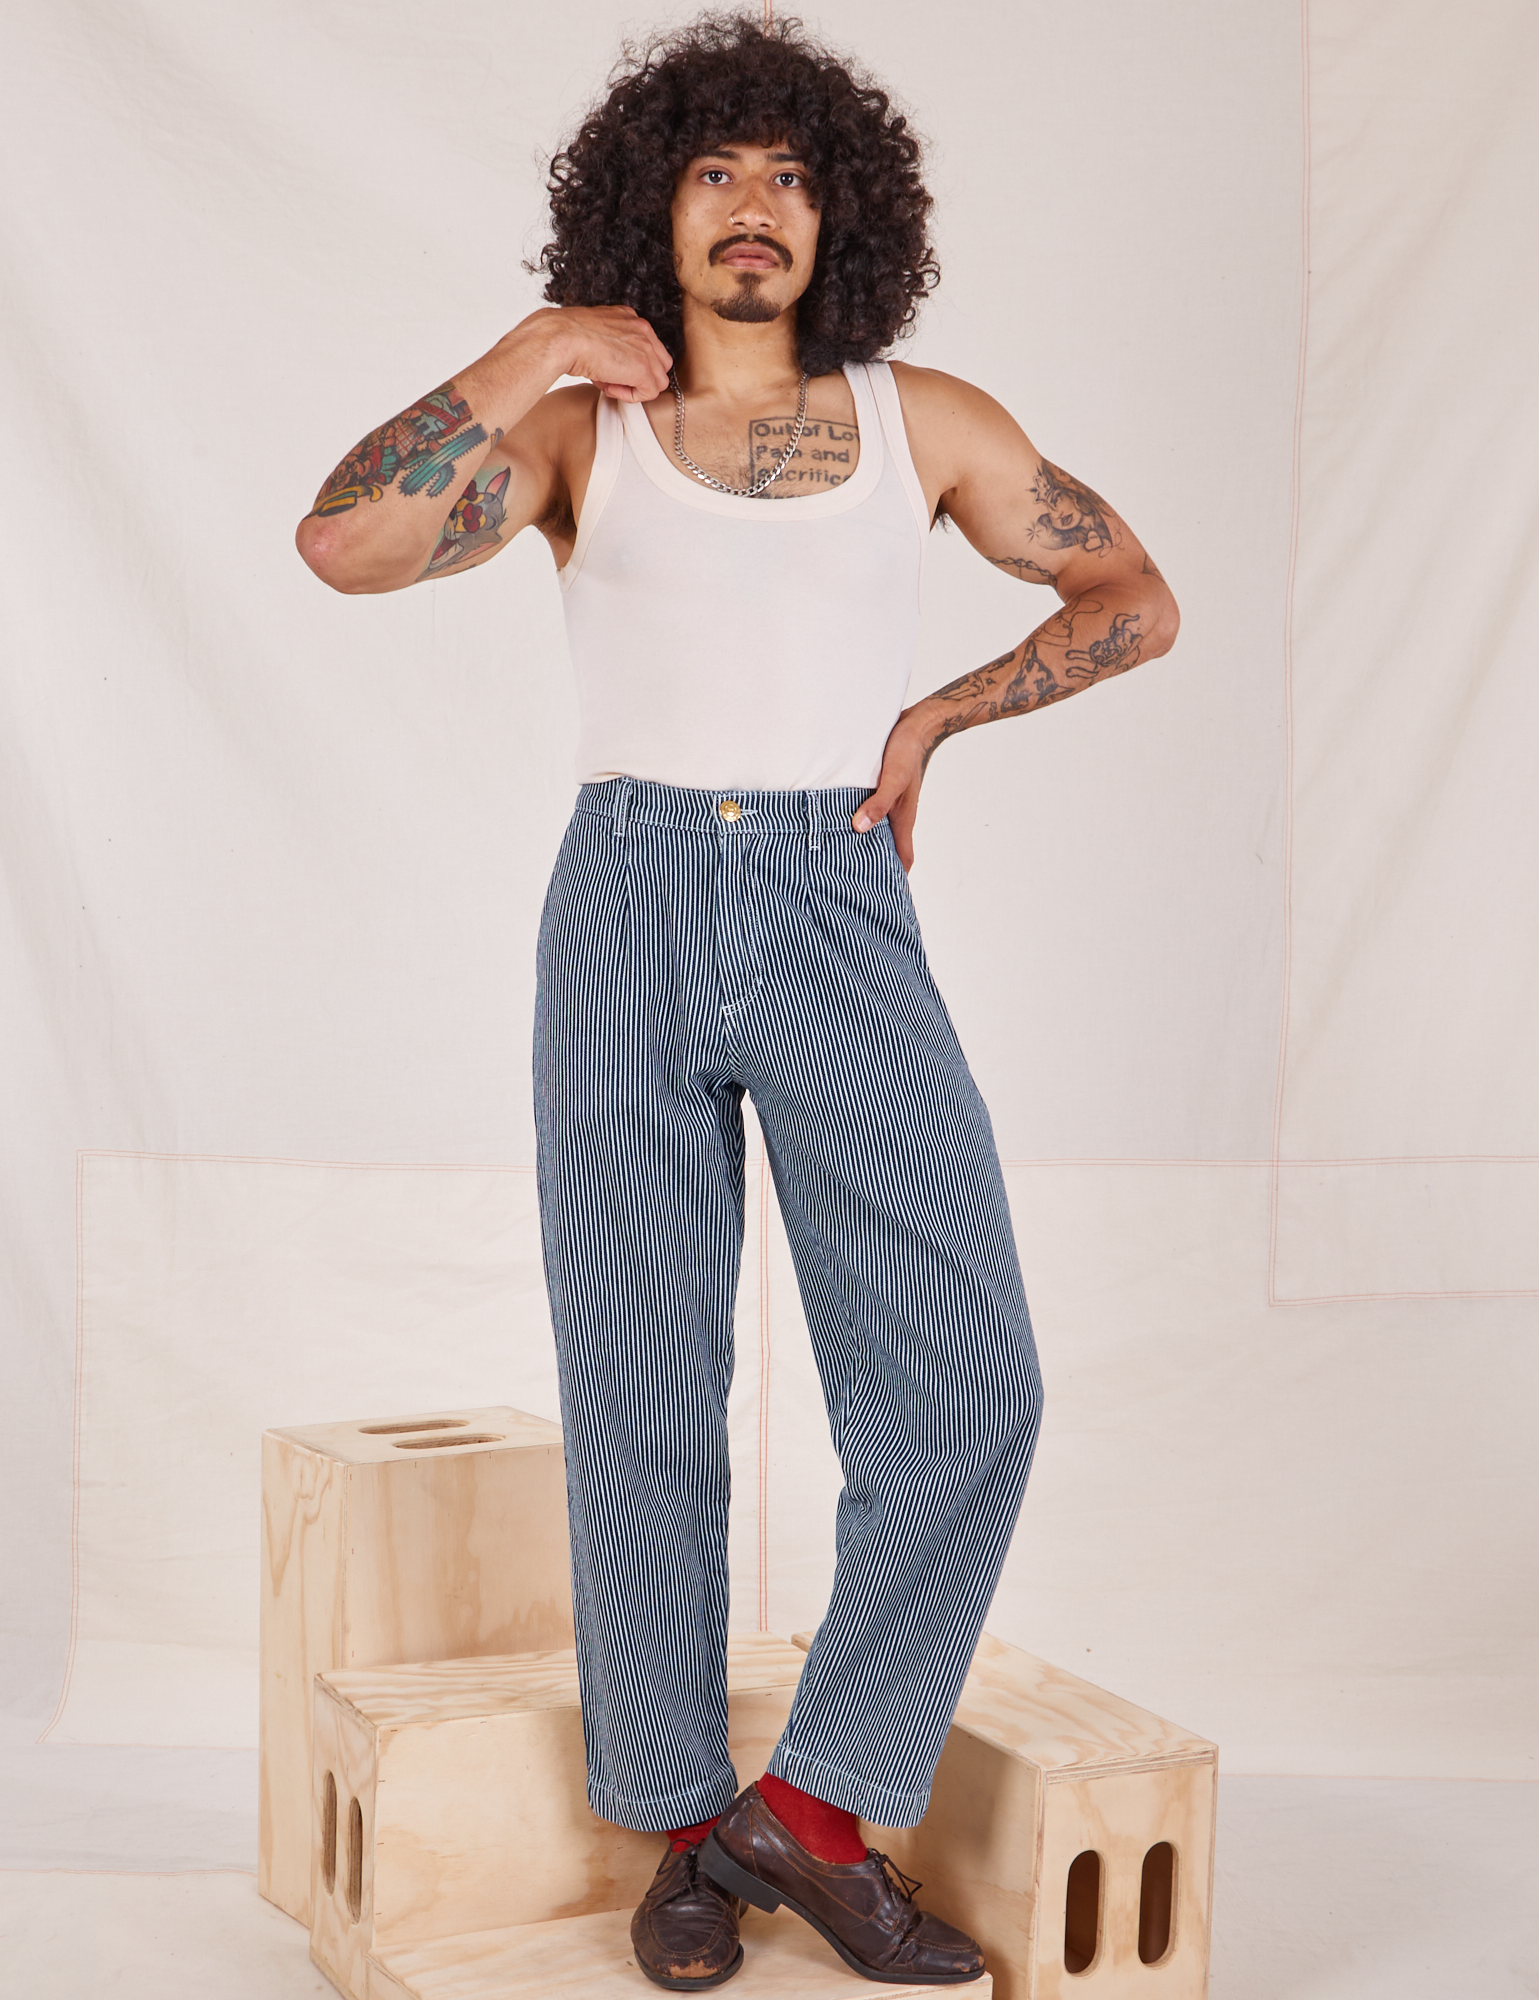 Jesse is 5&#39;8&quot; and wearing XXS Denim Trouser Jeans in Railroad Stripe paired with Tank Top in vintage tee off-white